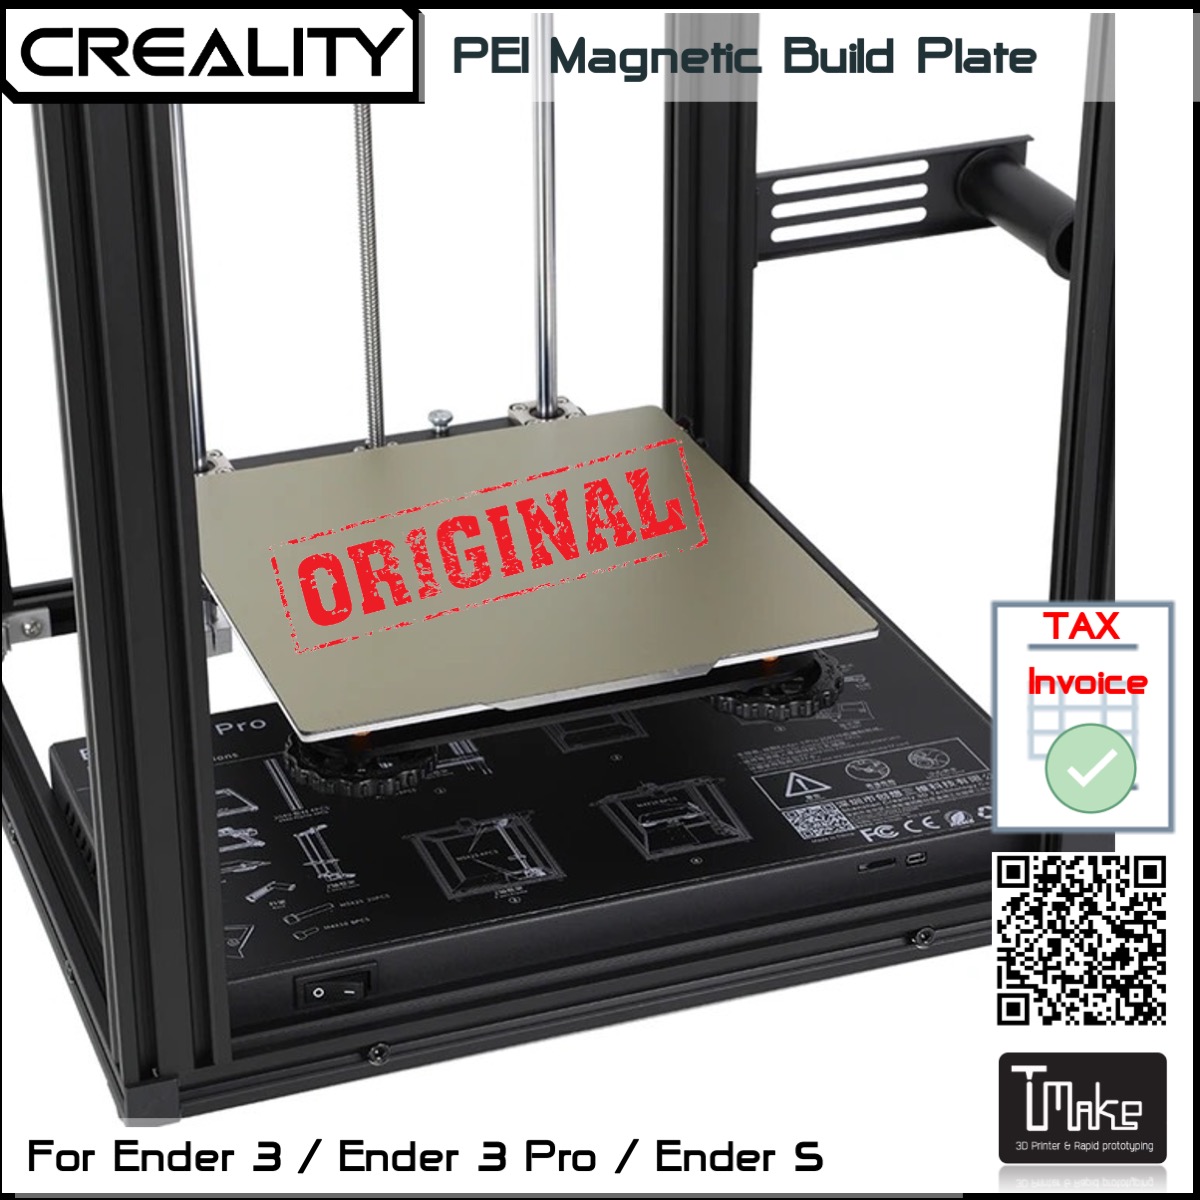 Creality PEI Magnetic Build Plate 235x235 mm